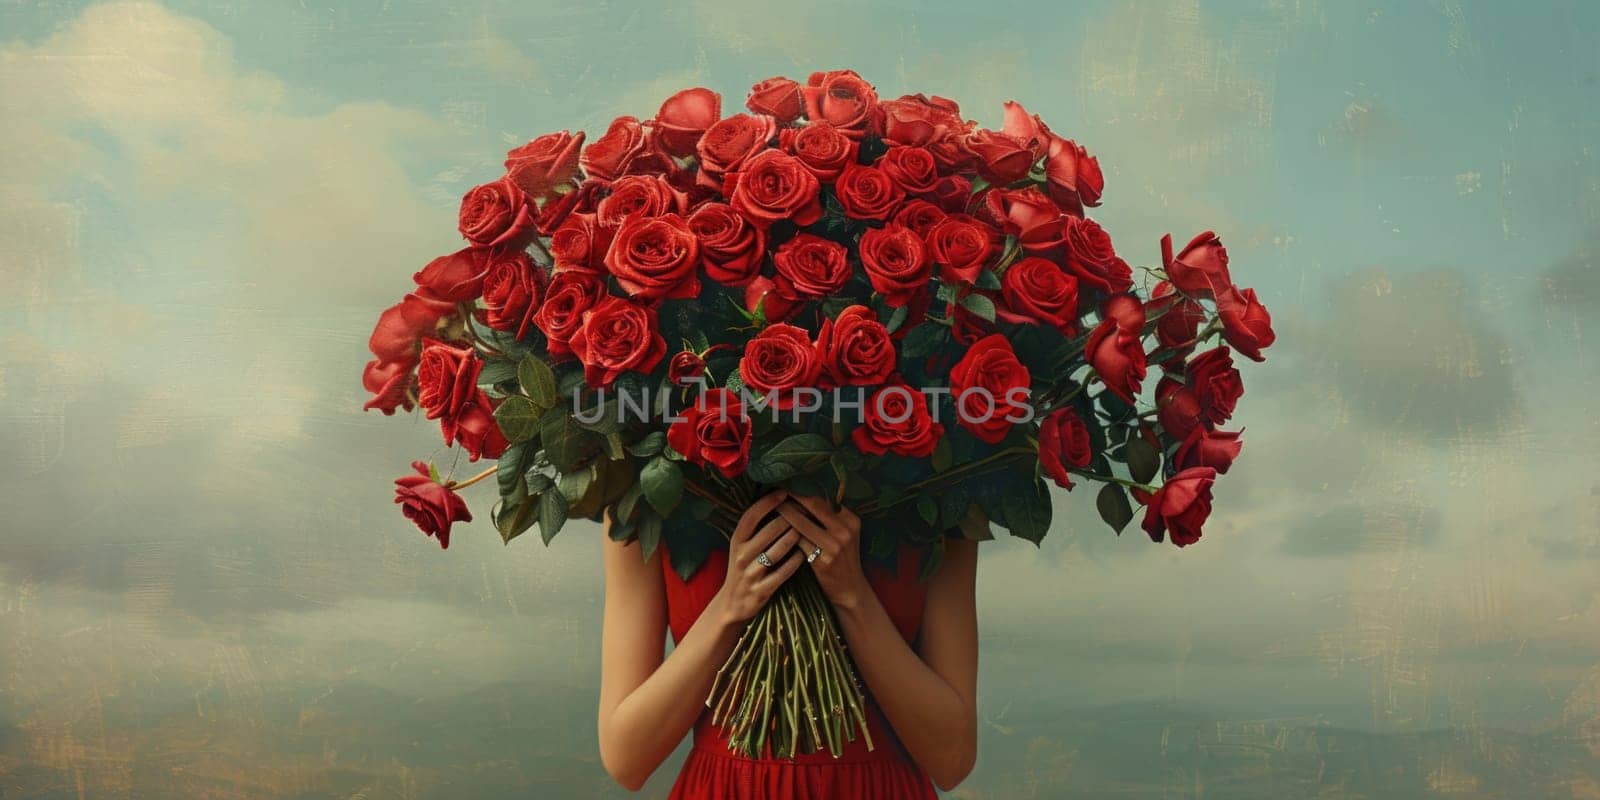 Woman in Red Dress Holding Bouquet of Red Roses by but_photo